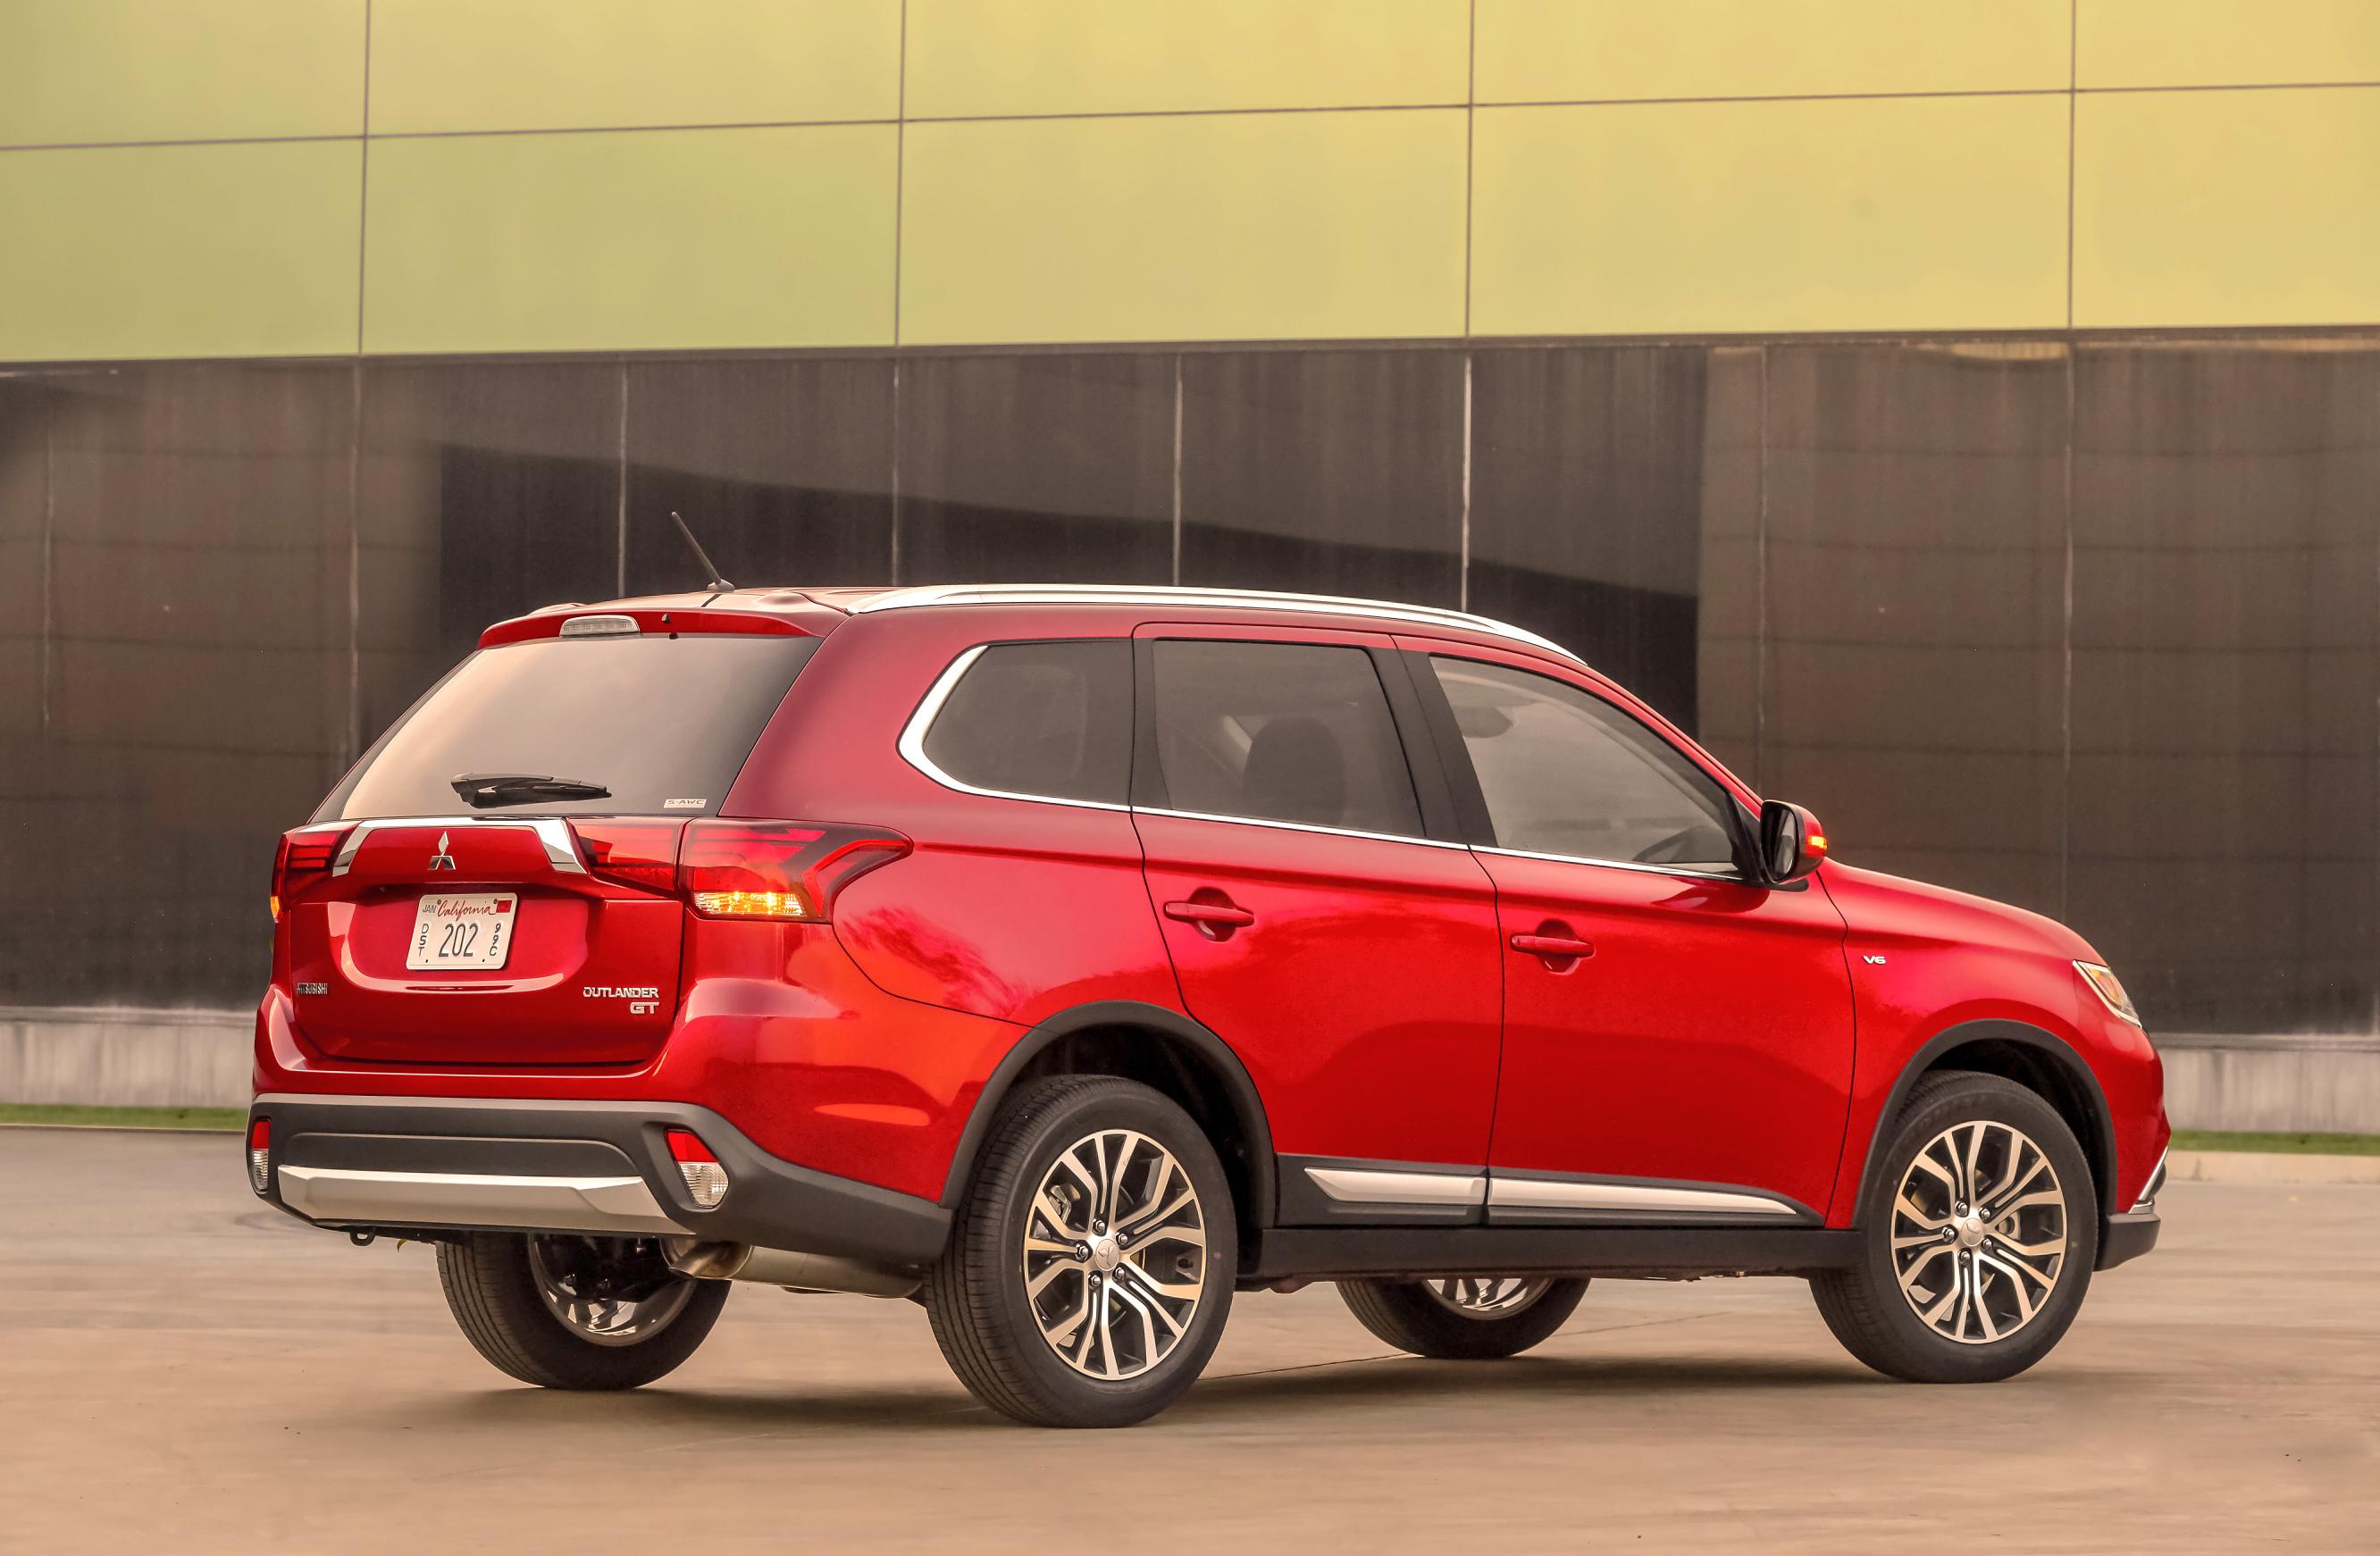 2016 Mitsubishi Outlander Features More of Everything